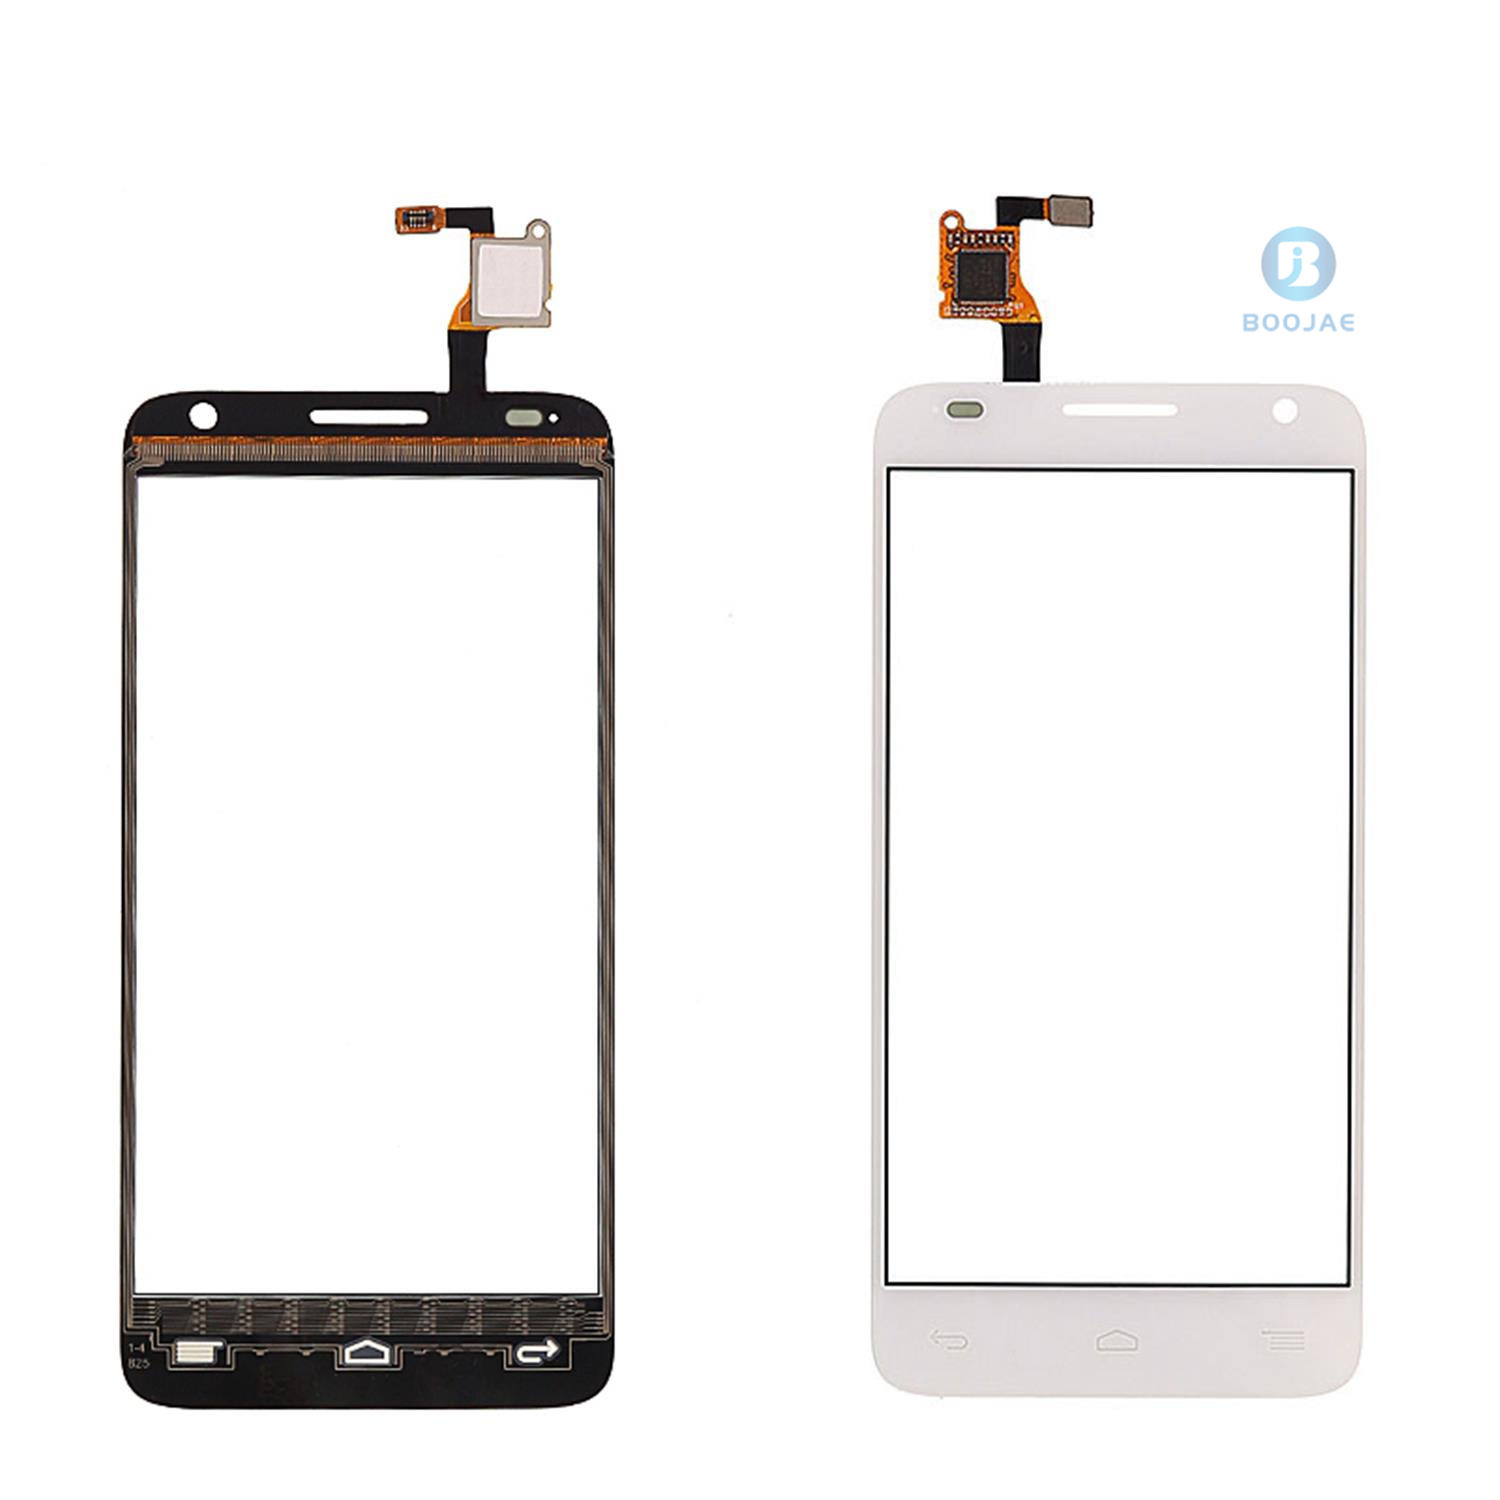 For Alcatel 6036 touch screen panel digitizer